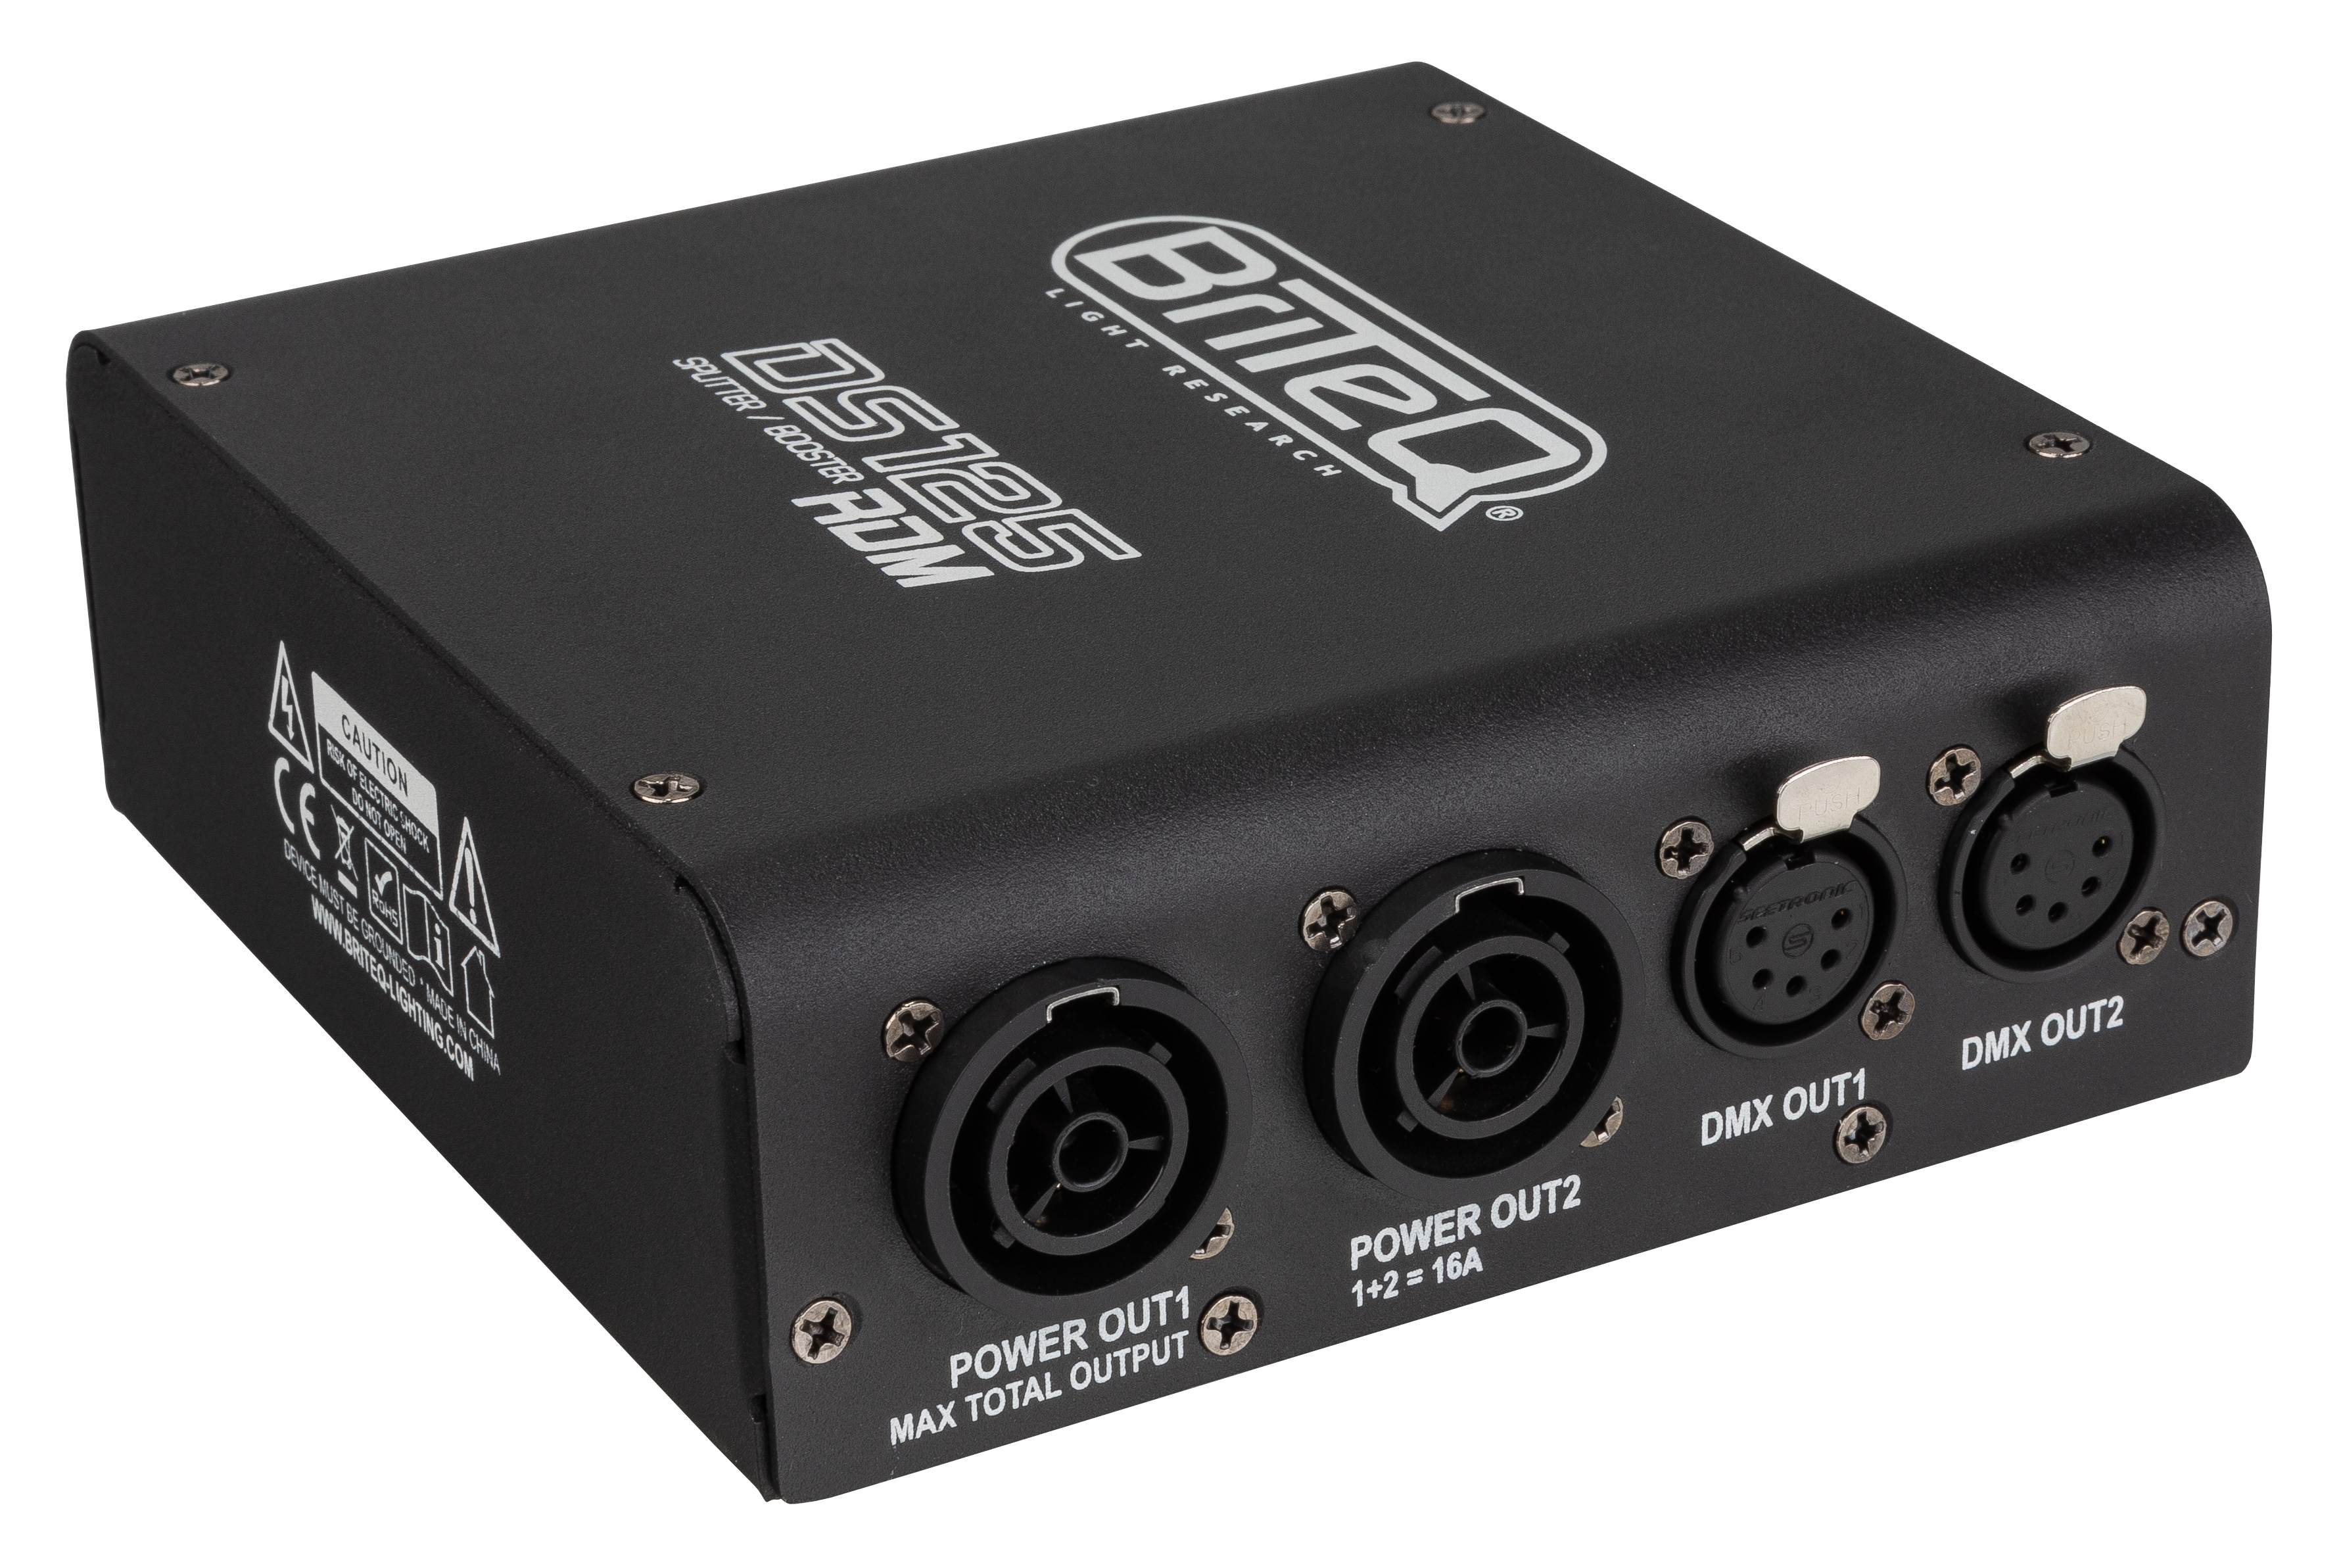 RDM compatible DMX splitter: splits mains power and DMX input into 2 optically separate outputs. Compact and robust, equipped with PowerCON TRUE1 / XLR 5pin.